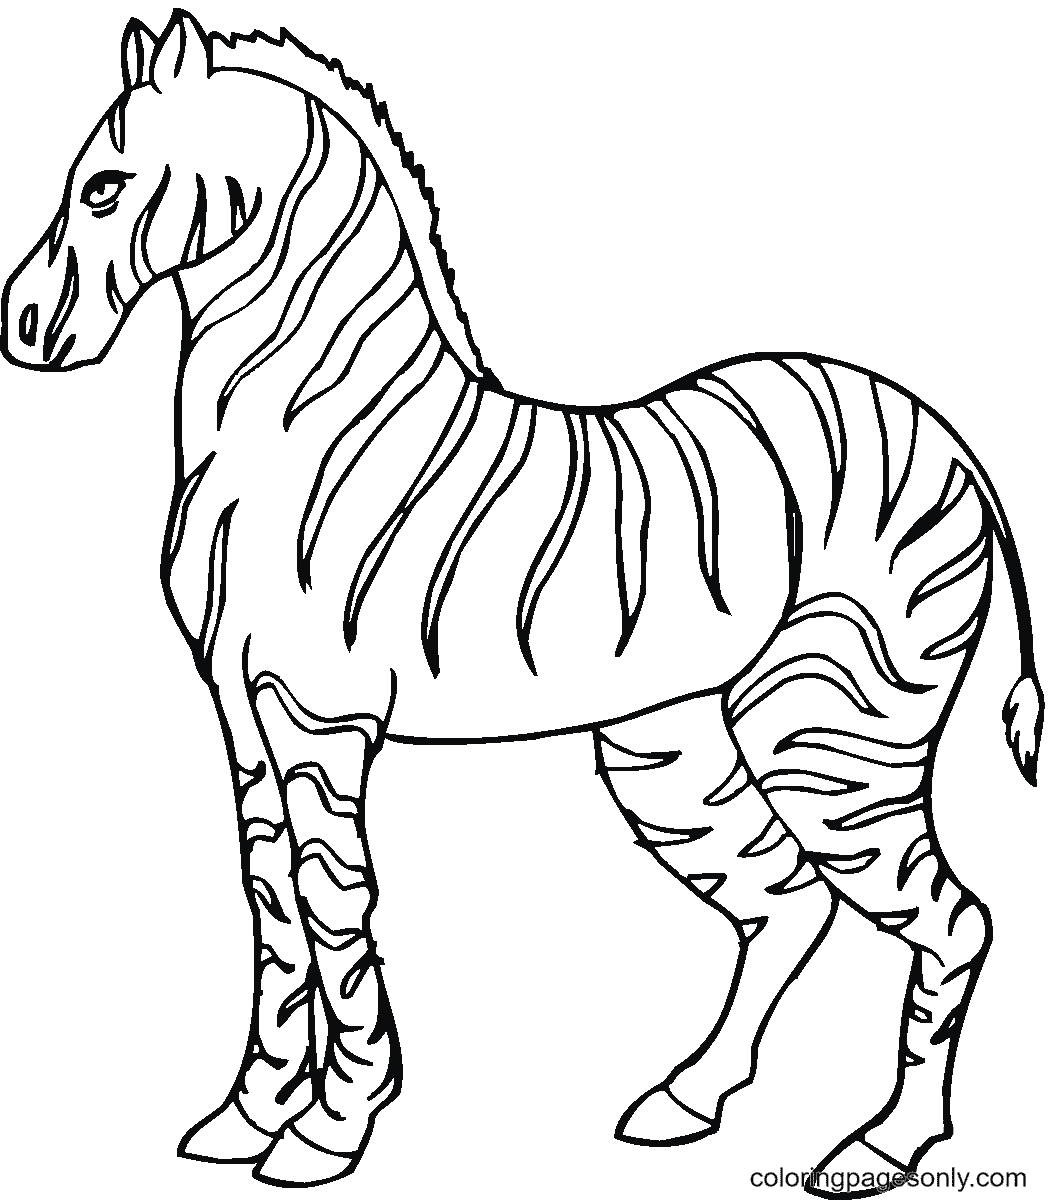 A Strong Zebra Coloring Page